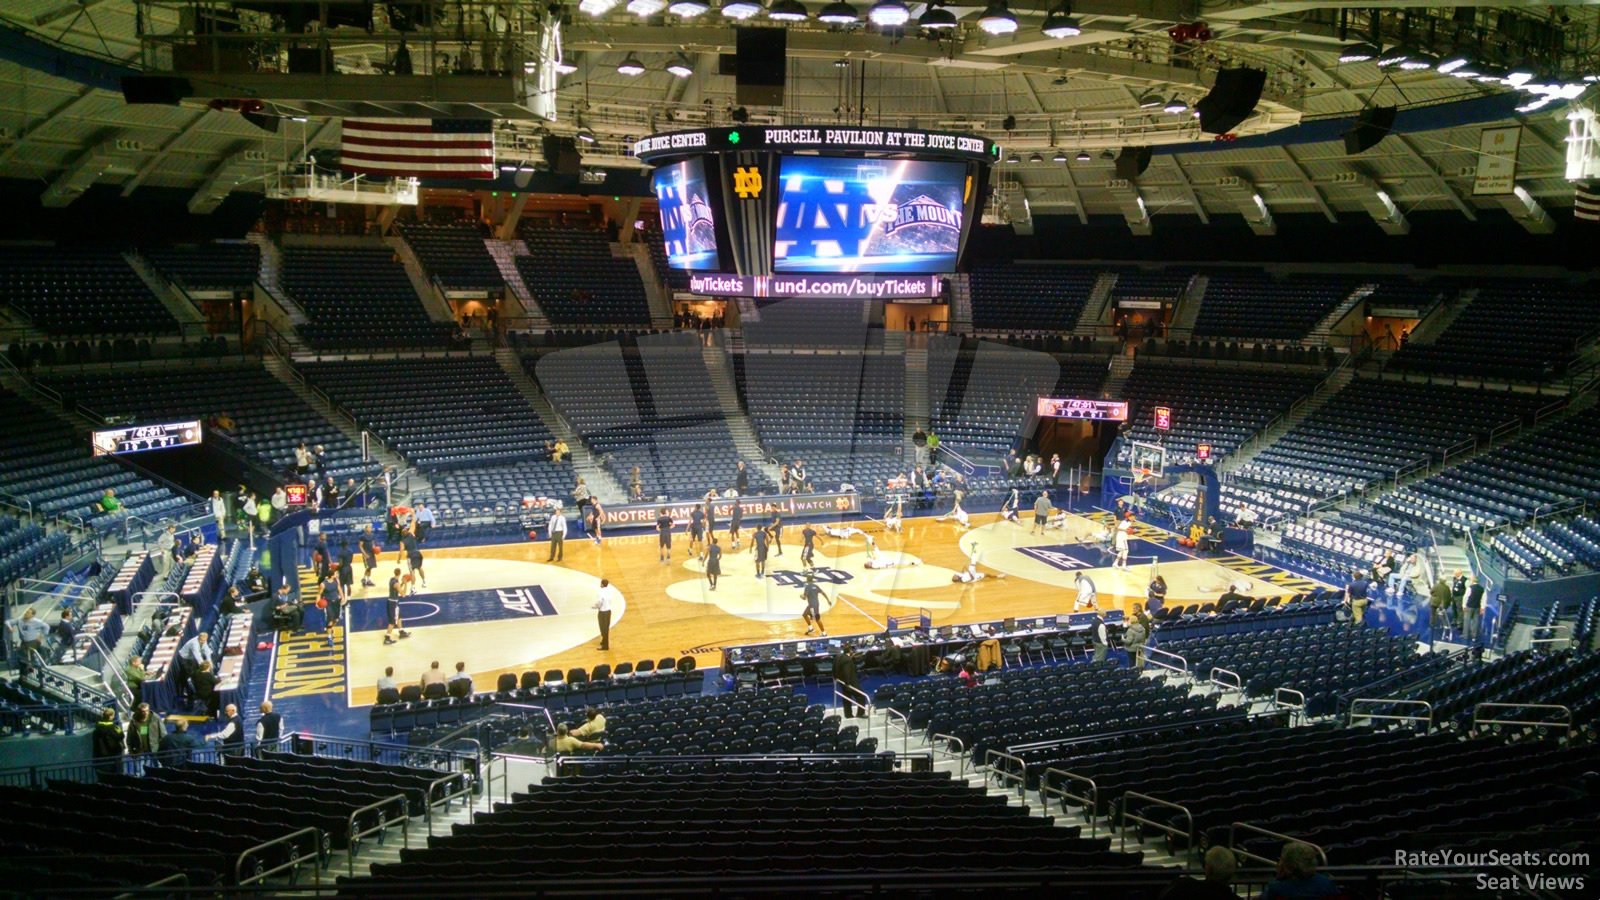 section 111, row 11 seat view  - joyce center